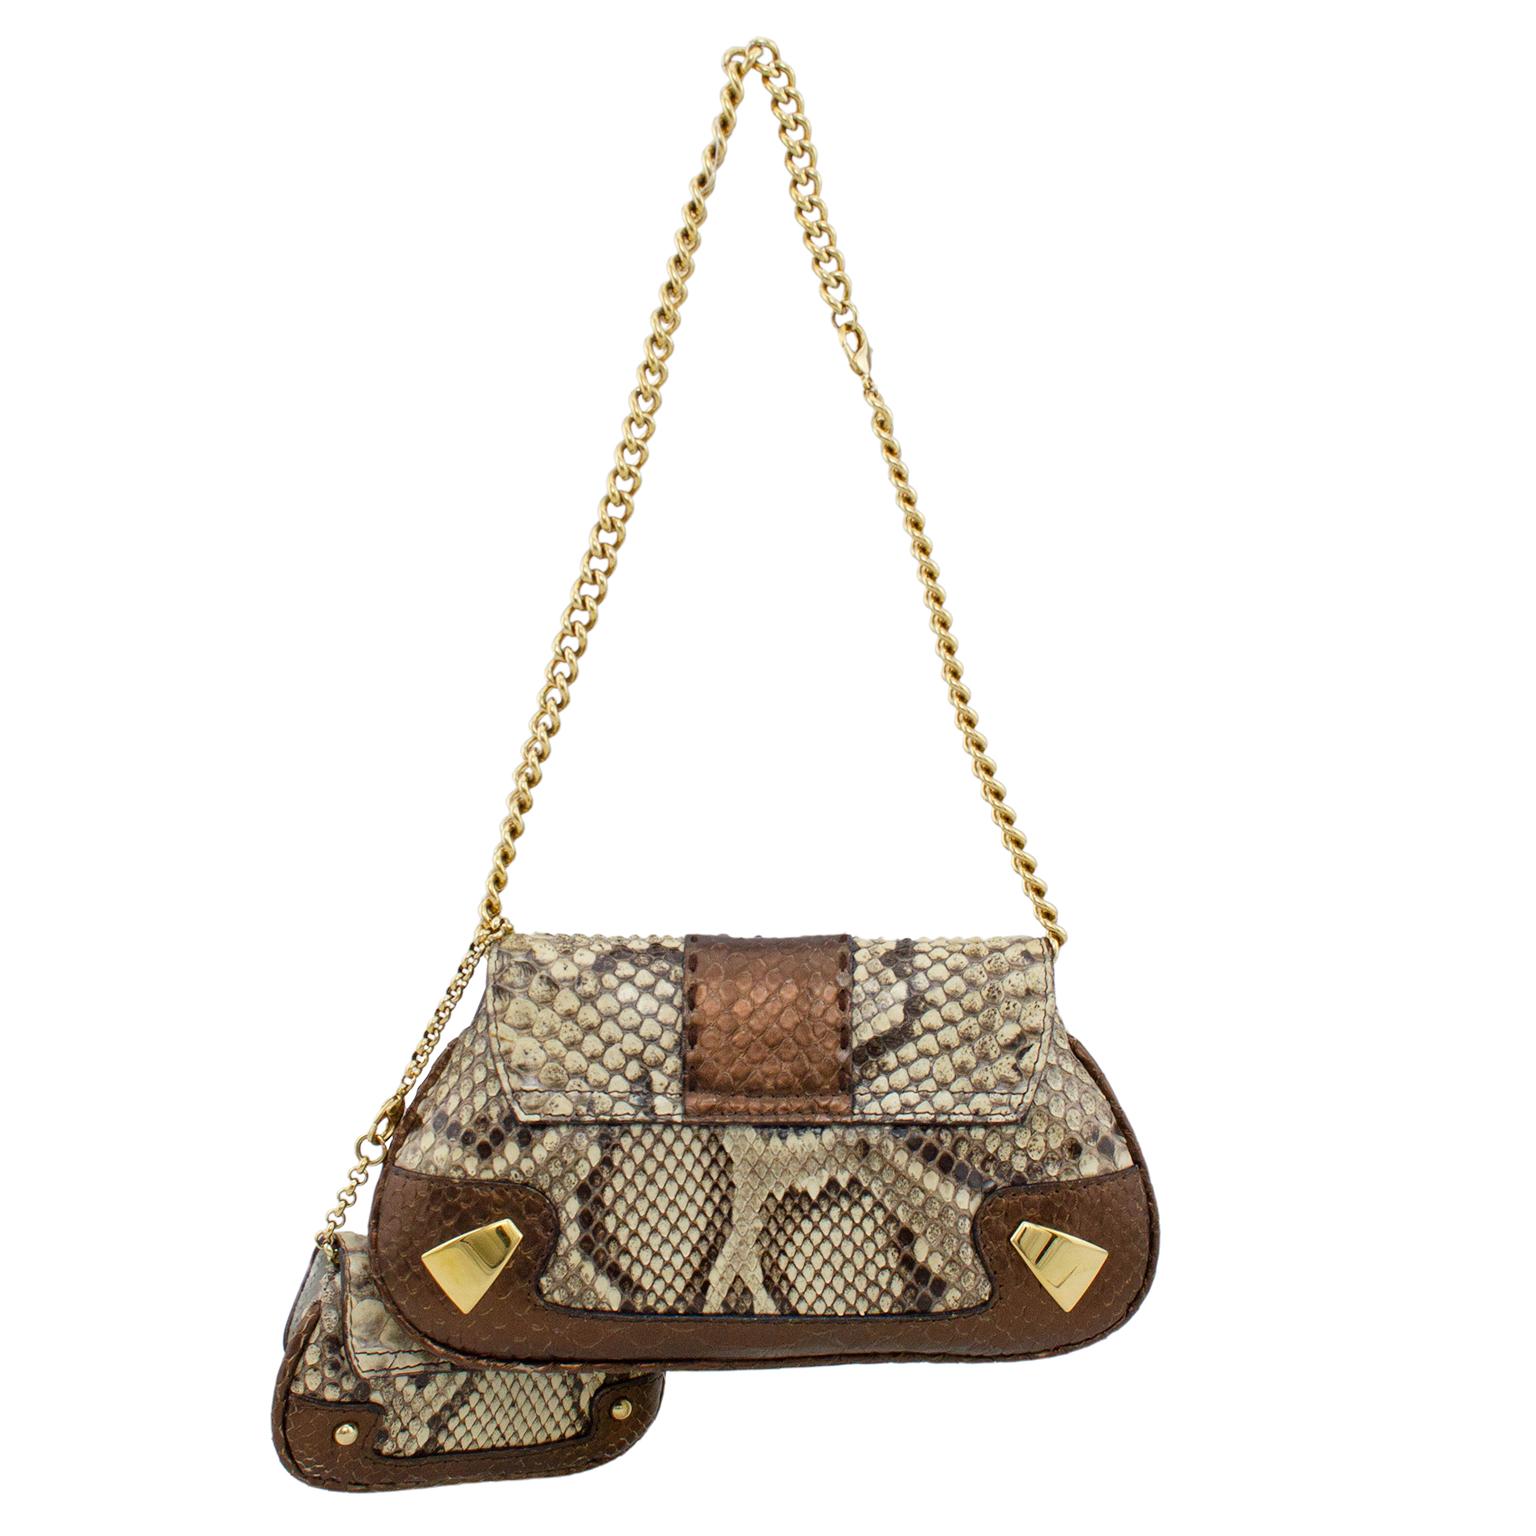 1990s Dolce and Gabbana bronze and cream small bag. Flap front with gold tone metal oval shaped handle to open and close. Flap fastens with two strong magnetic buttons. Matching gold tone details on front and back corners and chain strap. Small